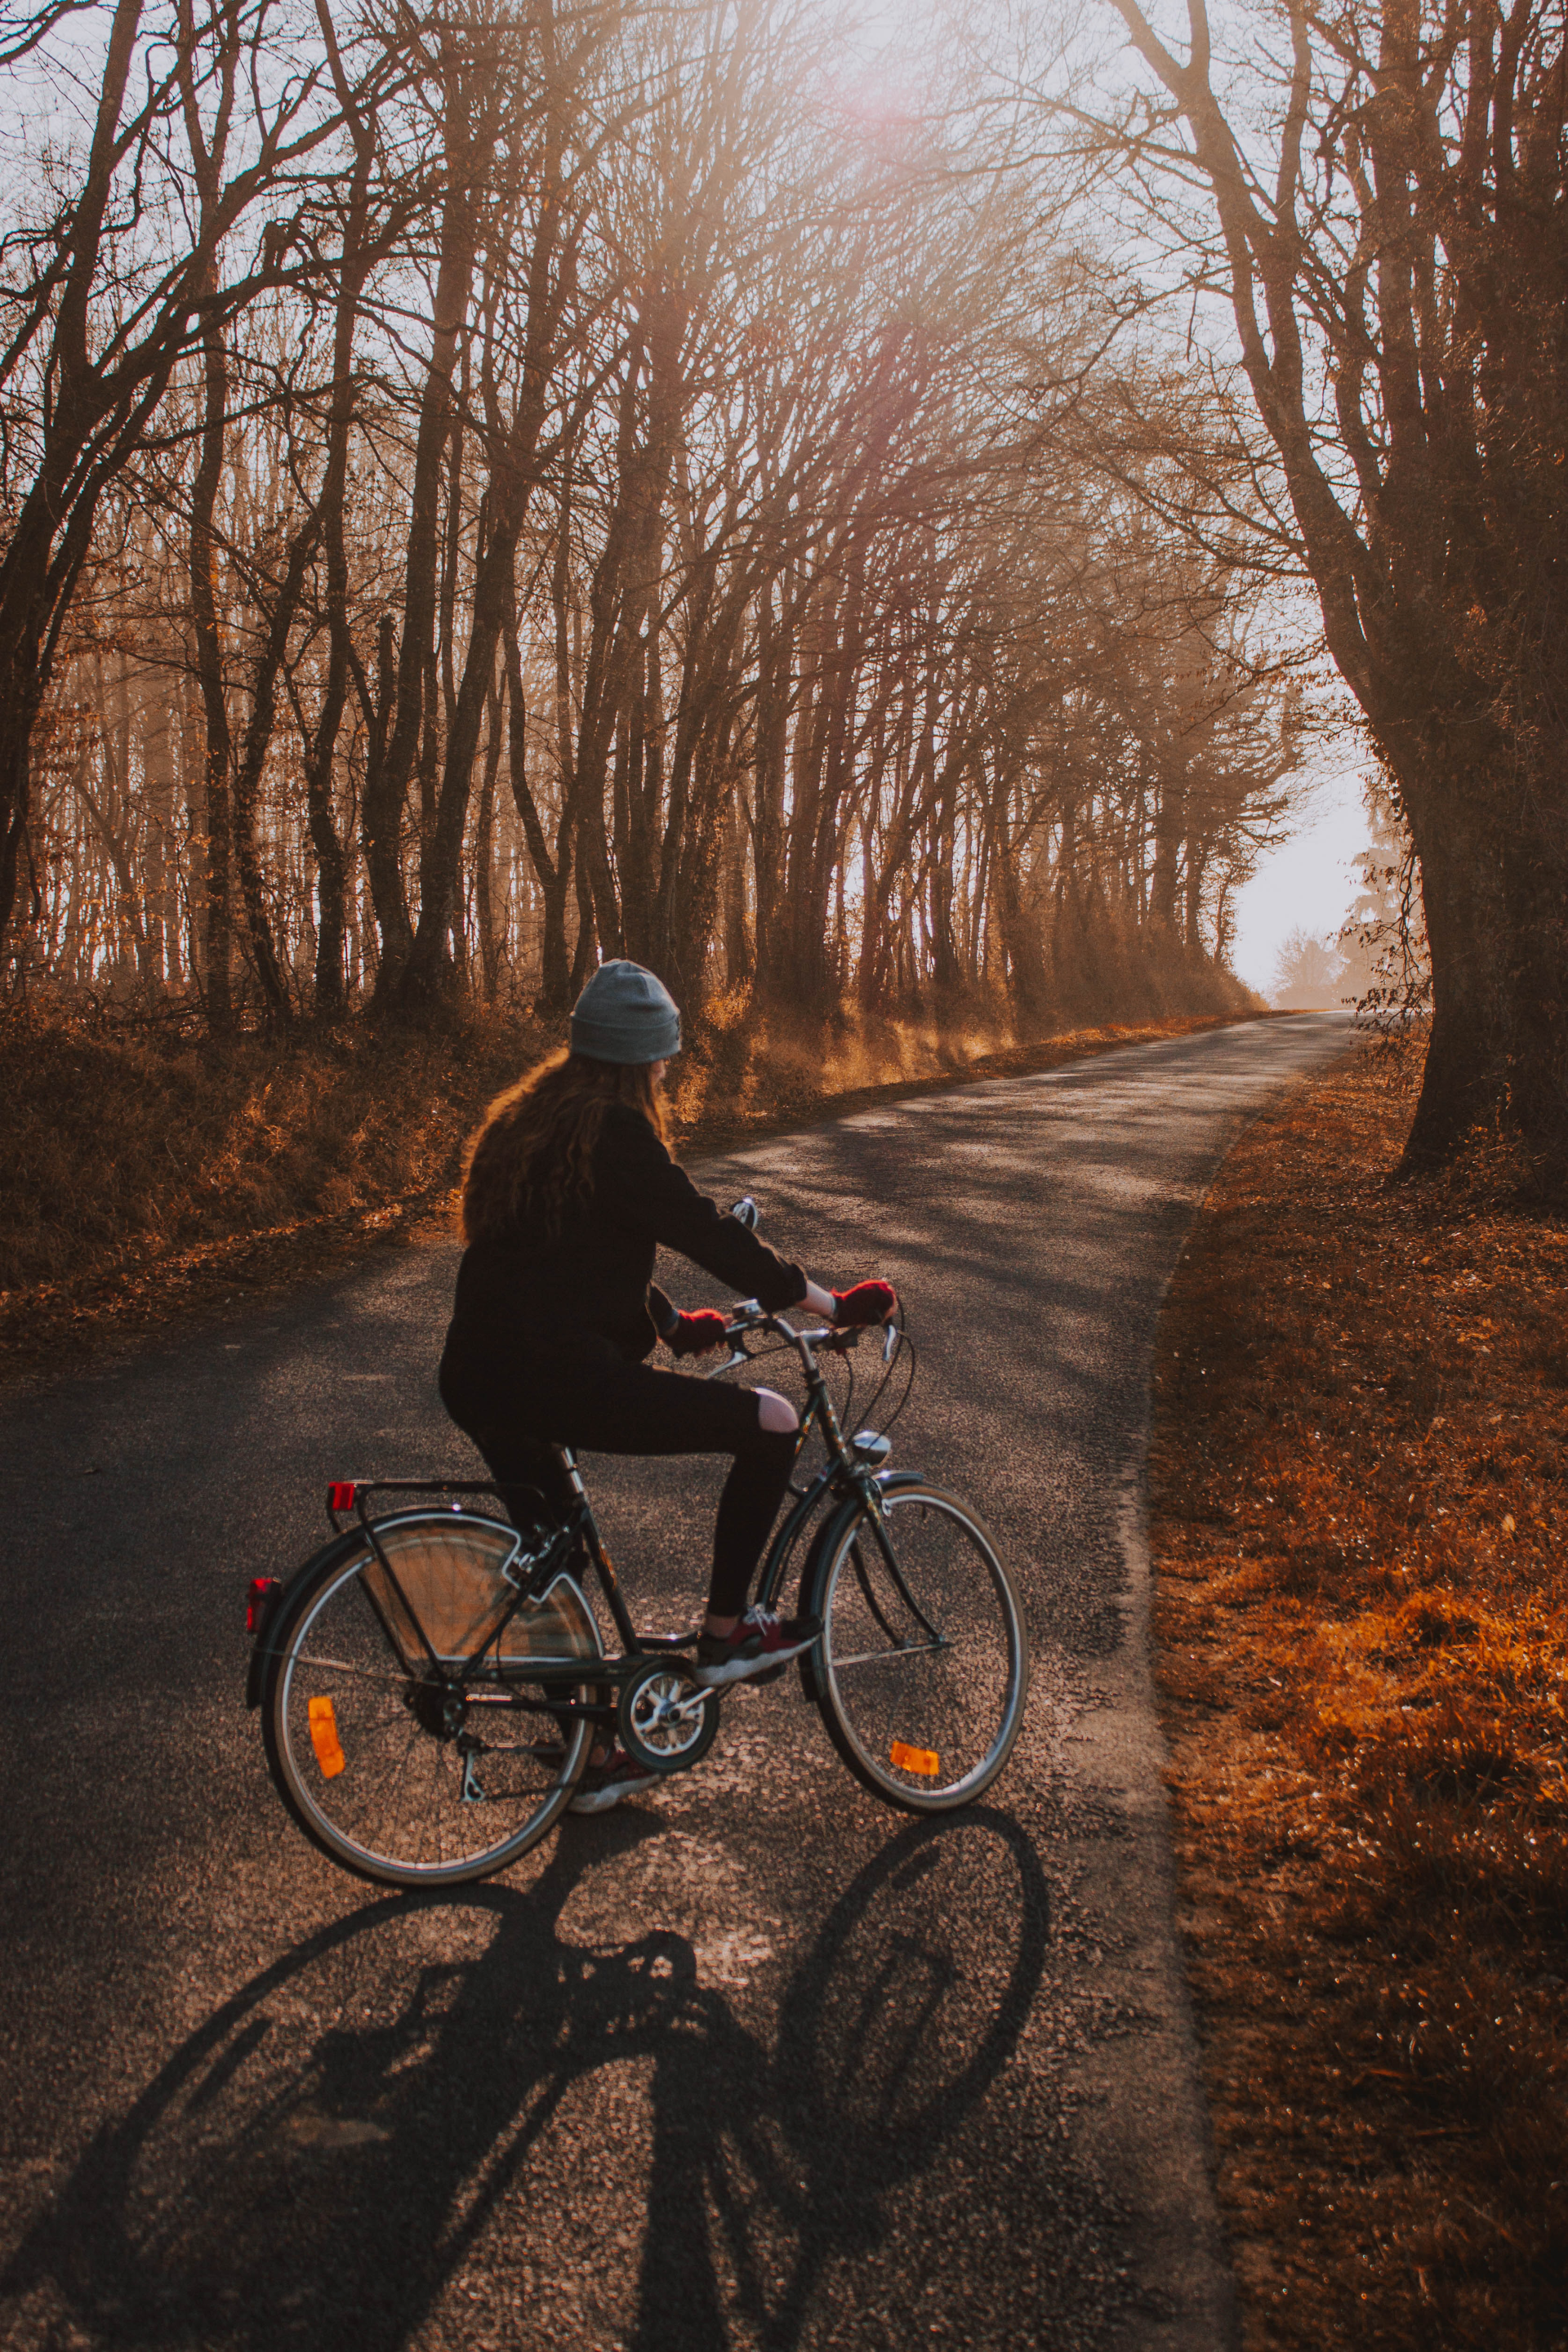 A woman is riding a bike down a road in the woods.